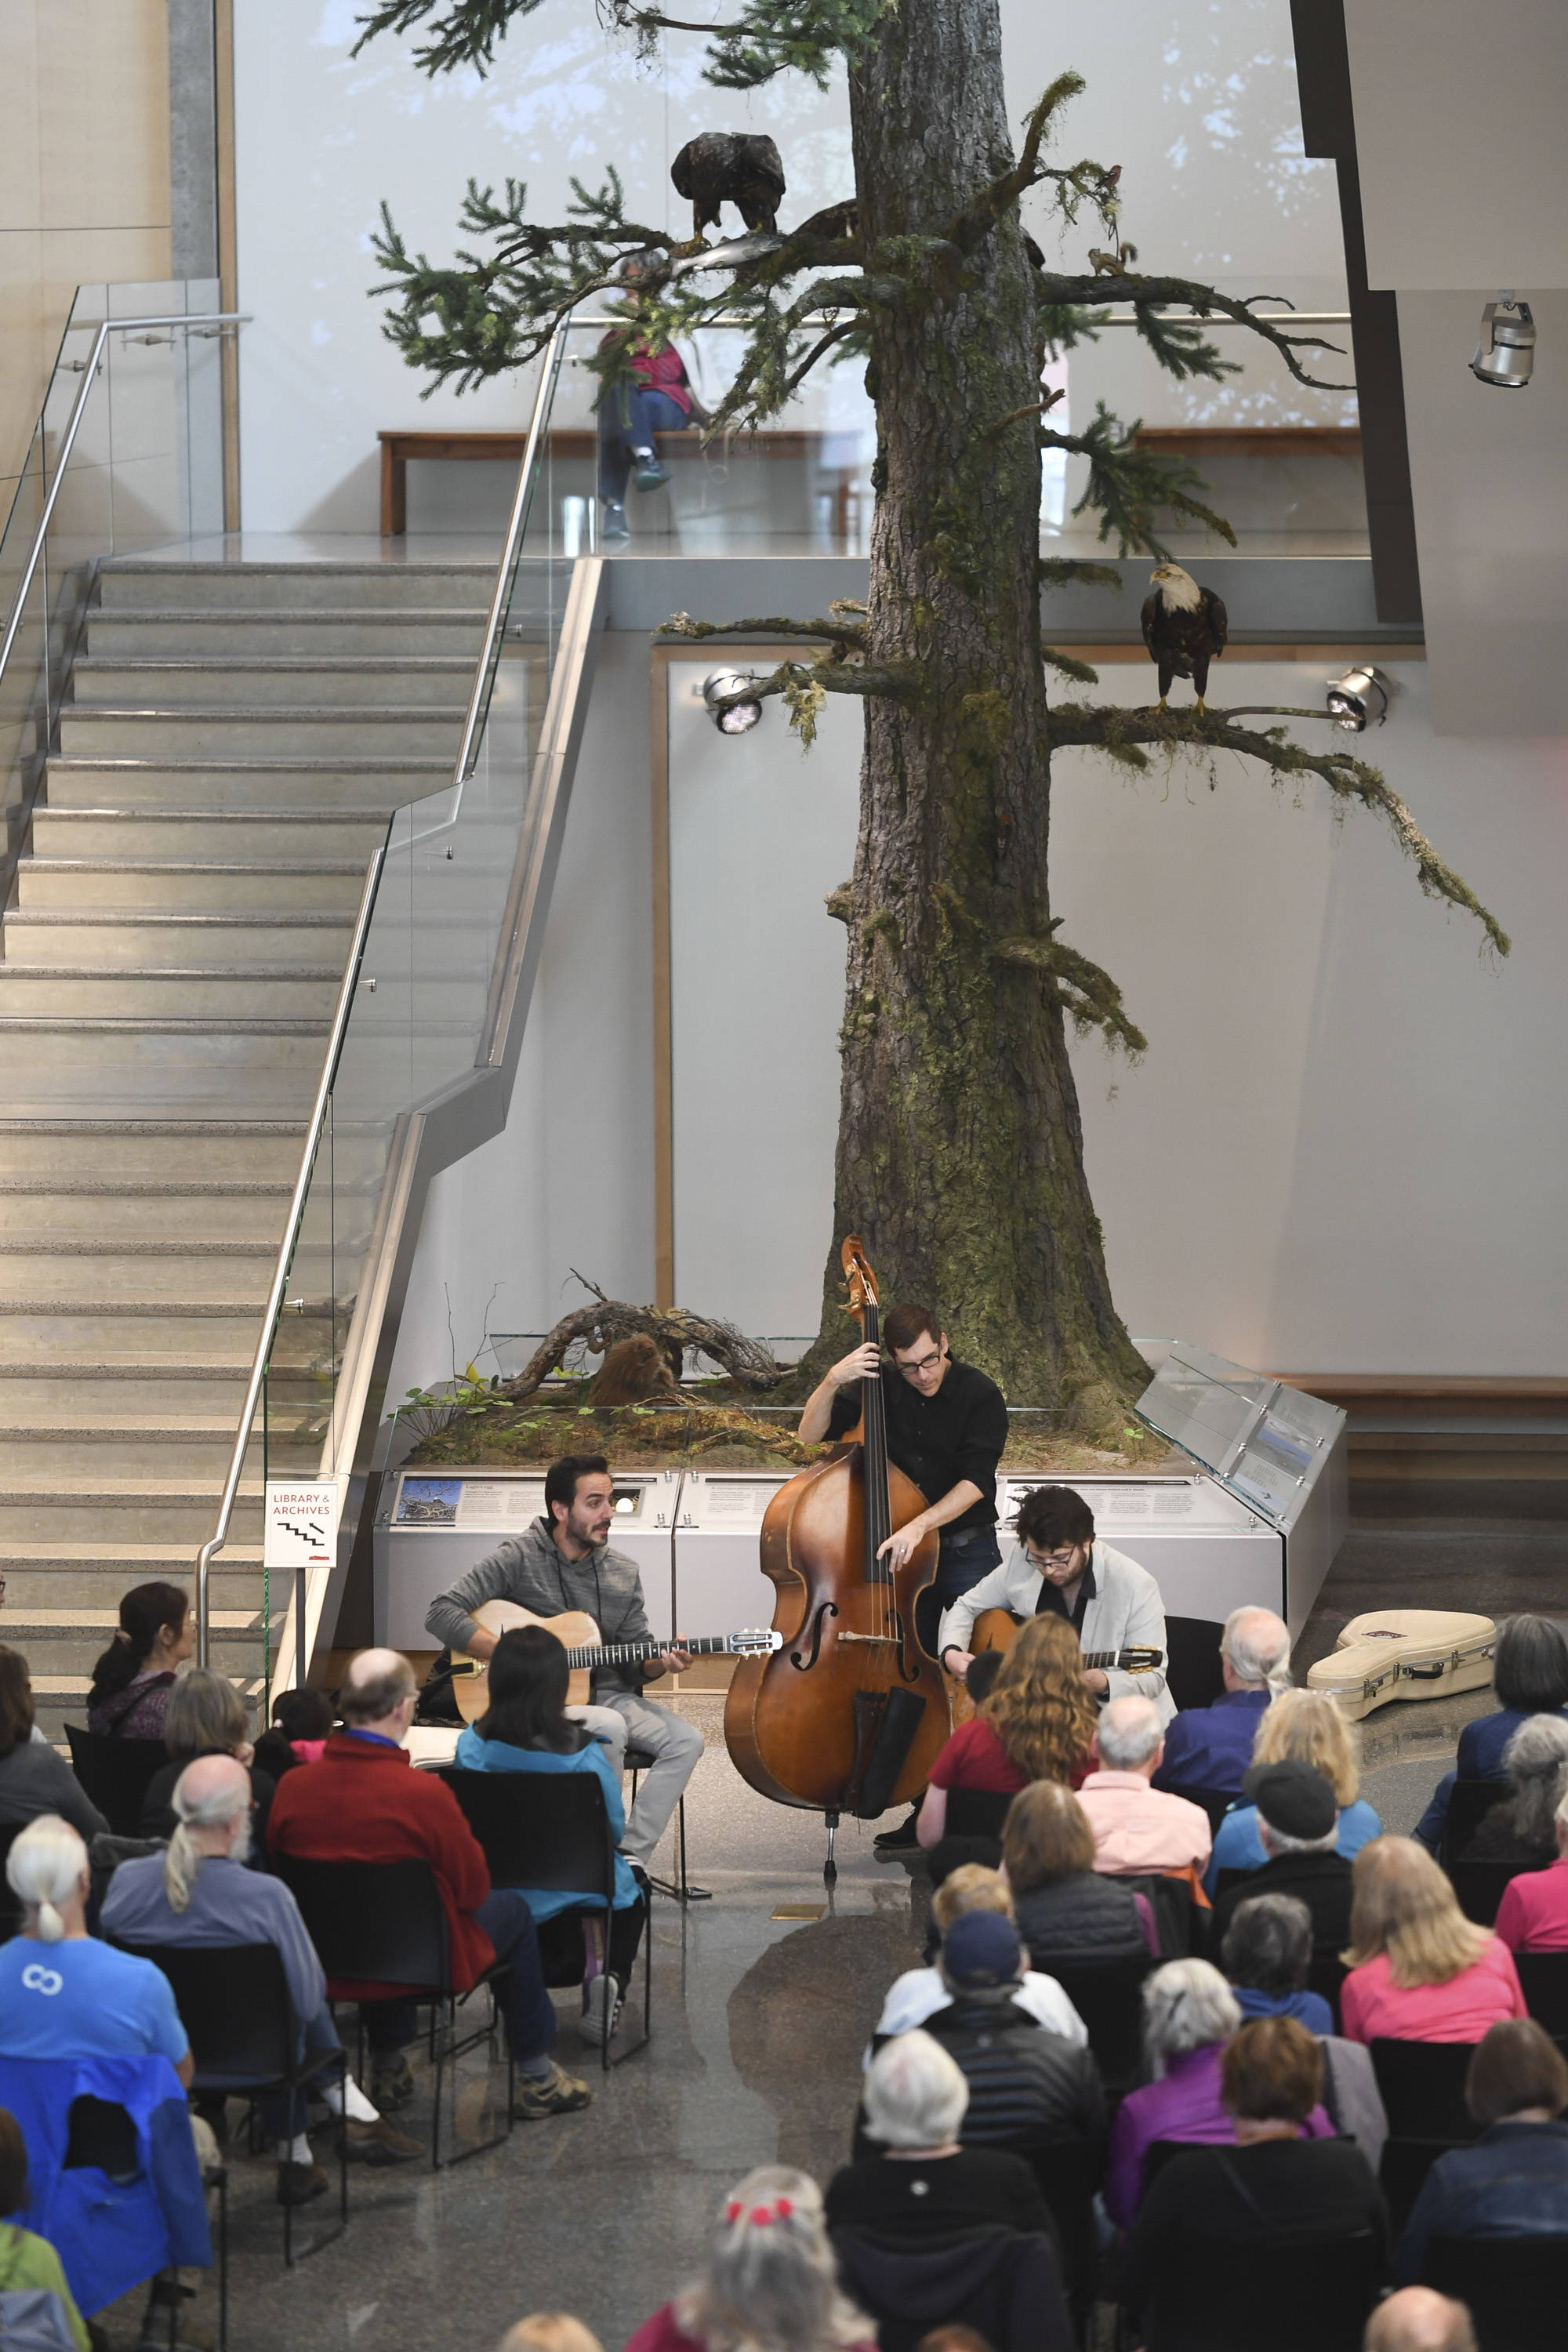 Members of the Gonzalo Bergara Trio perform in the atrium of the Andrew P. Kashevaroff (APK) Building as part of Juneau Jazz & Classics on Friday, May 10, 2019. The music festival continues through May 18. (Michael Penn | Juneau Empire)